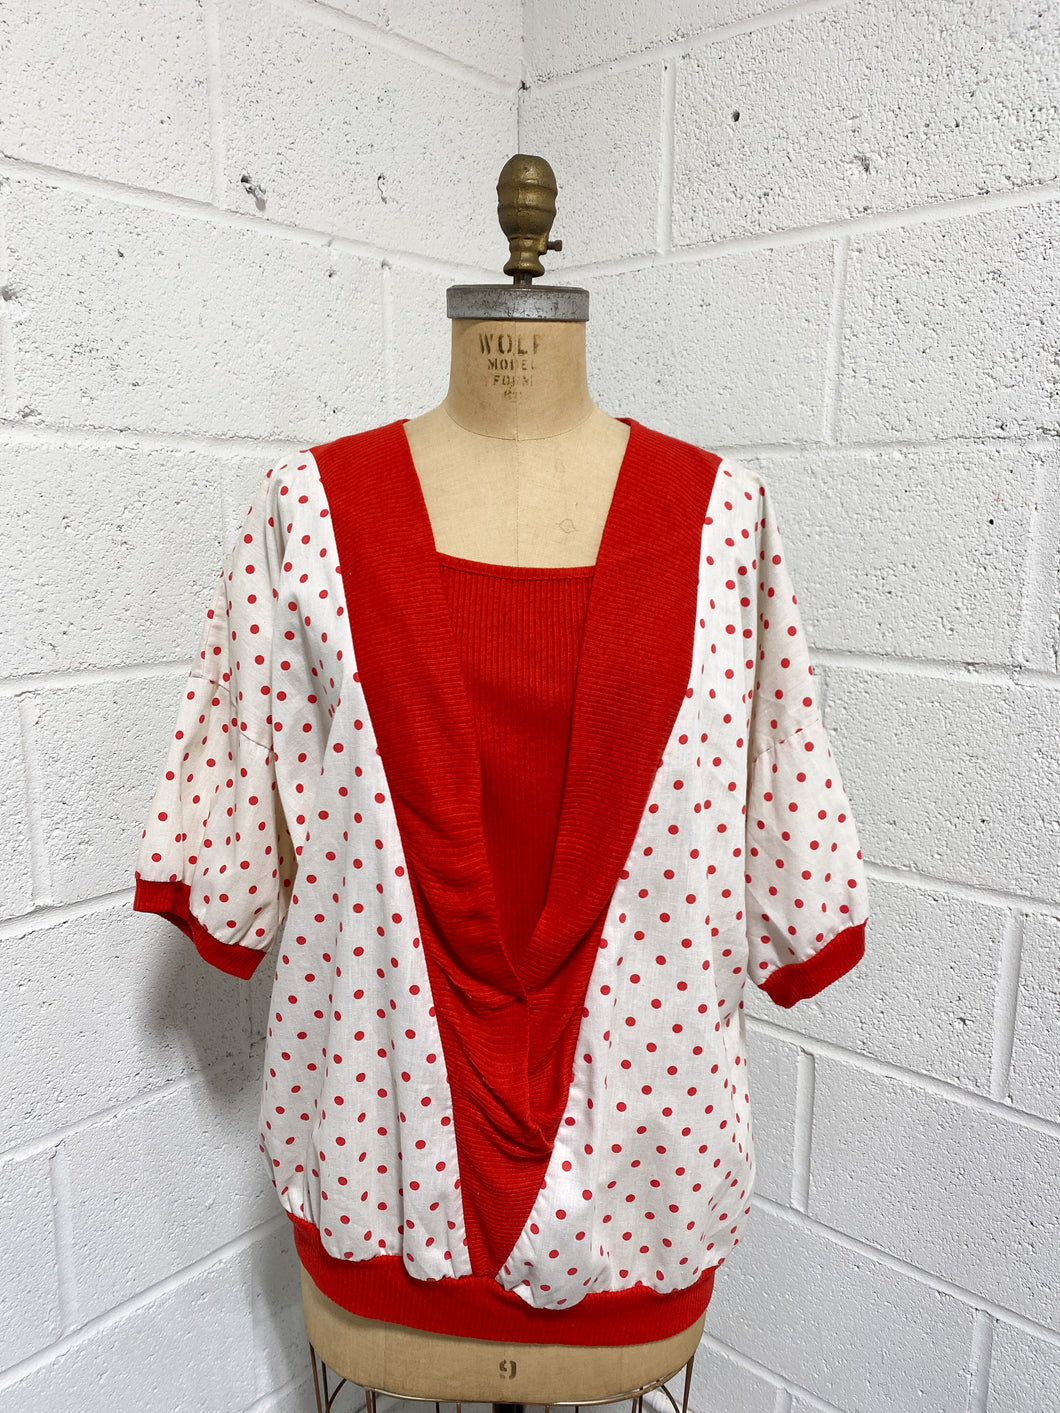 Vintage White with Red Polka Dot Blouse - As Found(20W)